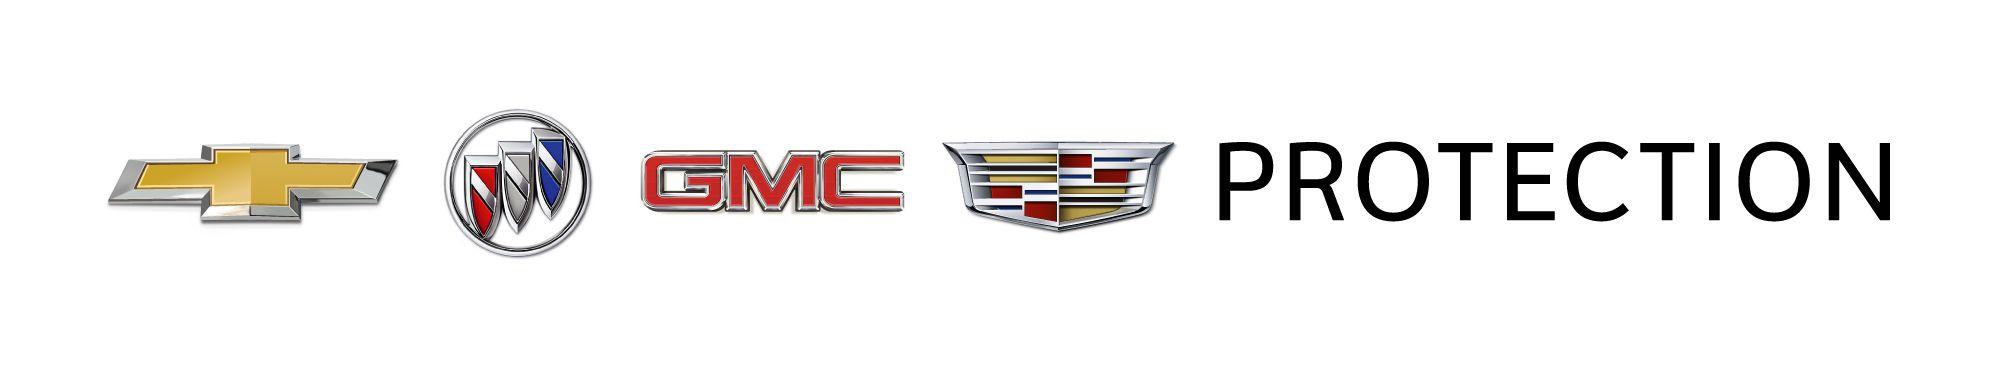 Chevy Buick Logo - Chevrolet, Buick, GMC and Cadillac Protection